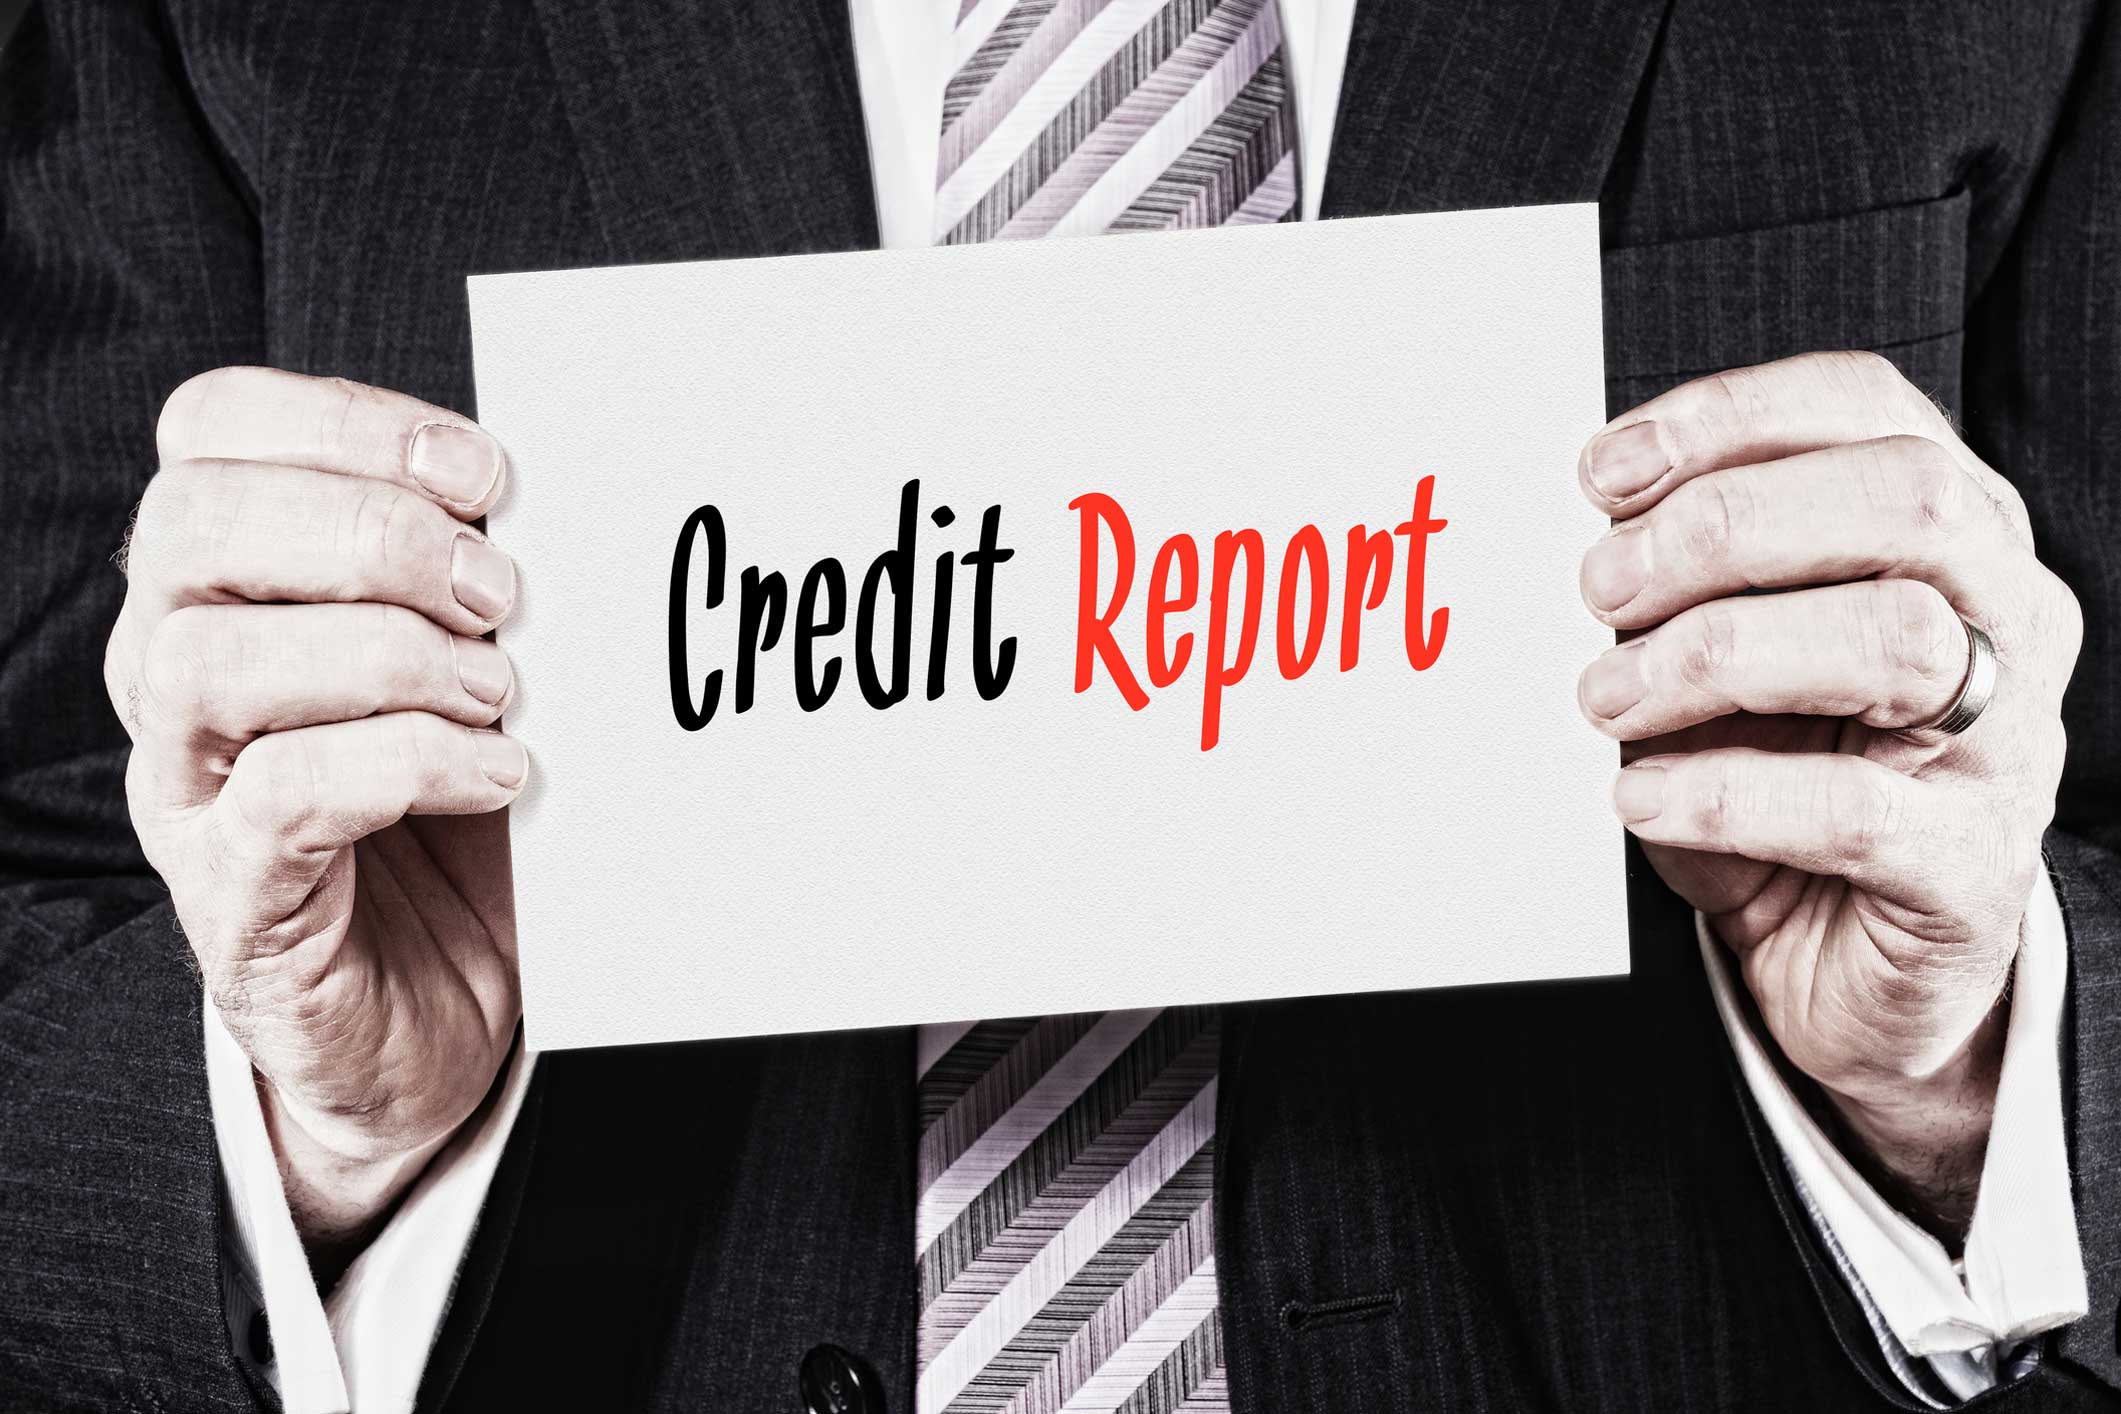 A man in a suit holding a white card that says credit report